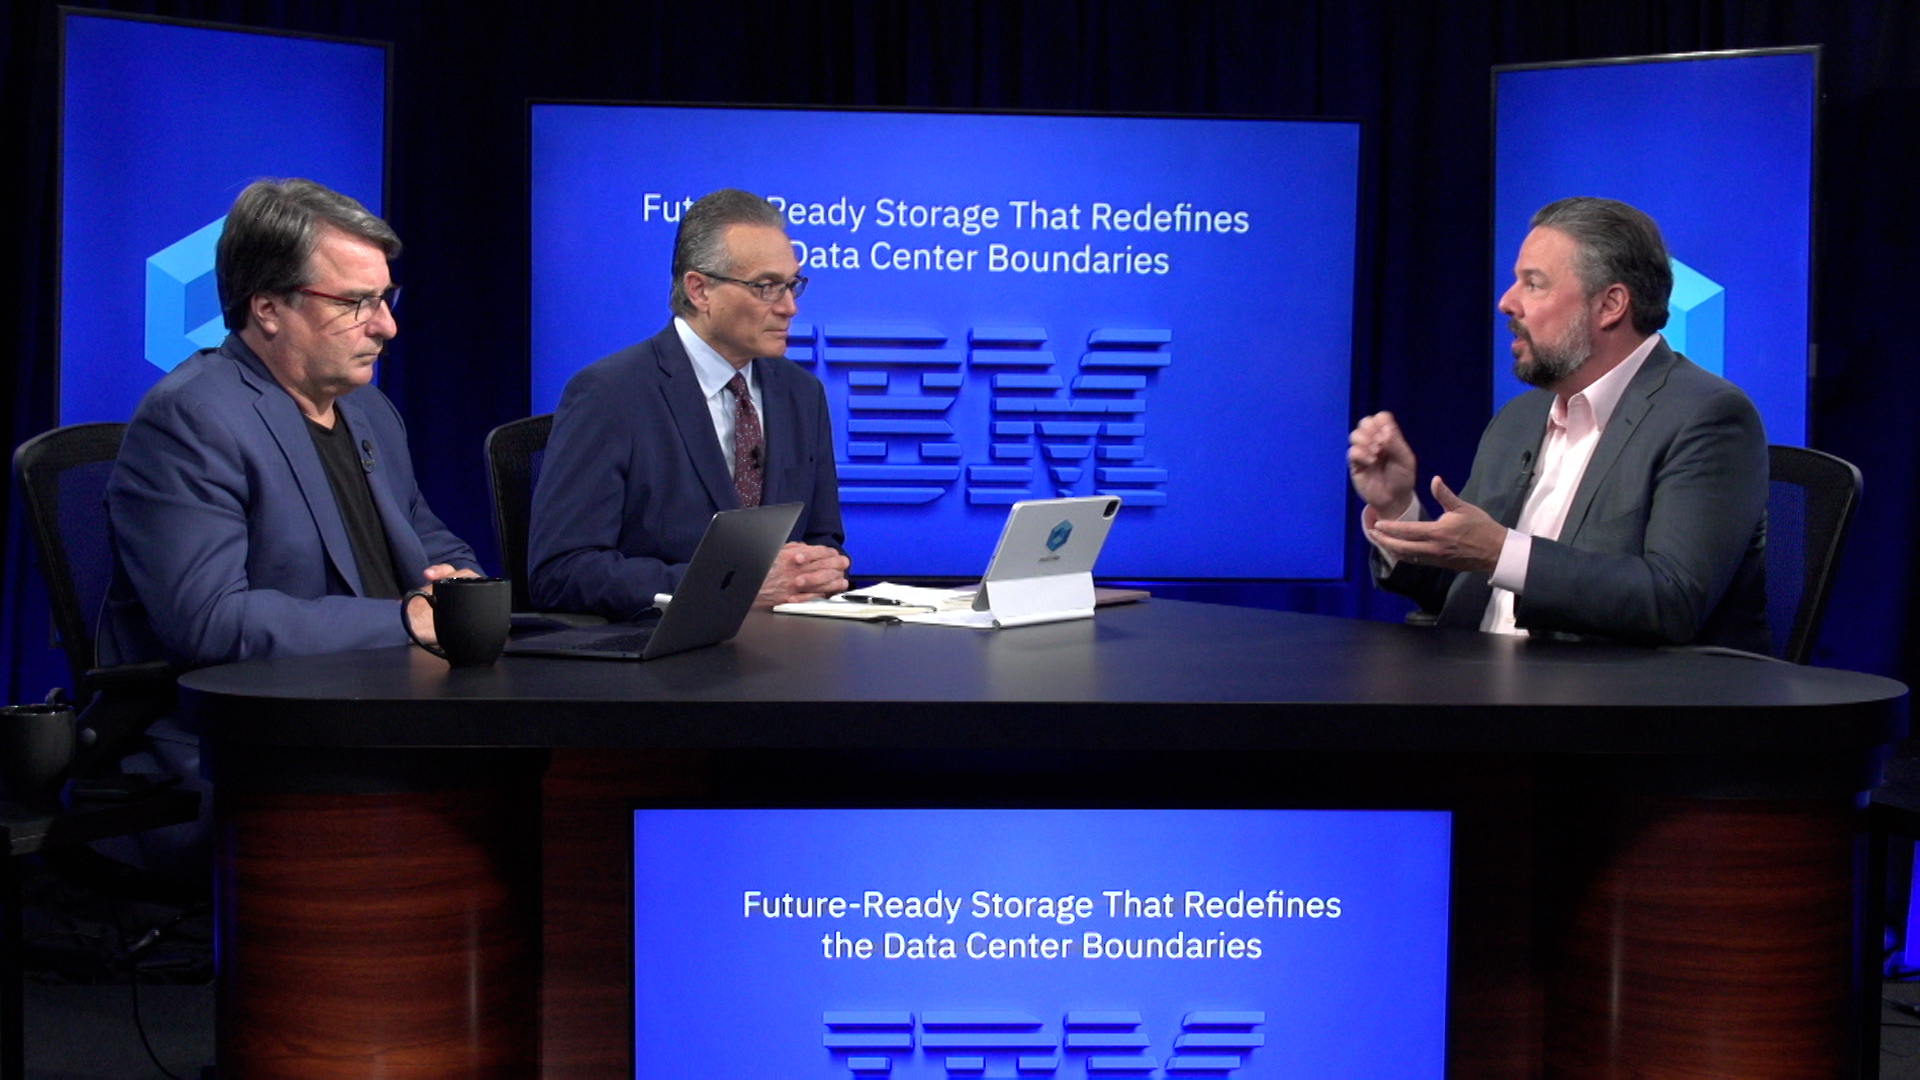 AI-driven data: theCUBE analysts assess IBM’s future-ready storage solutions